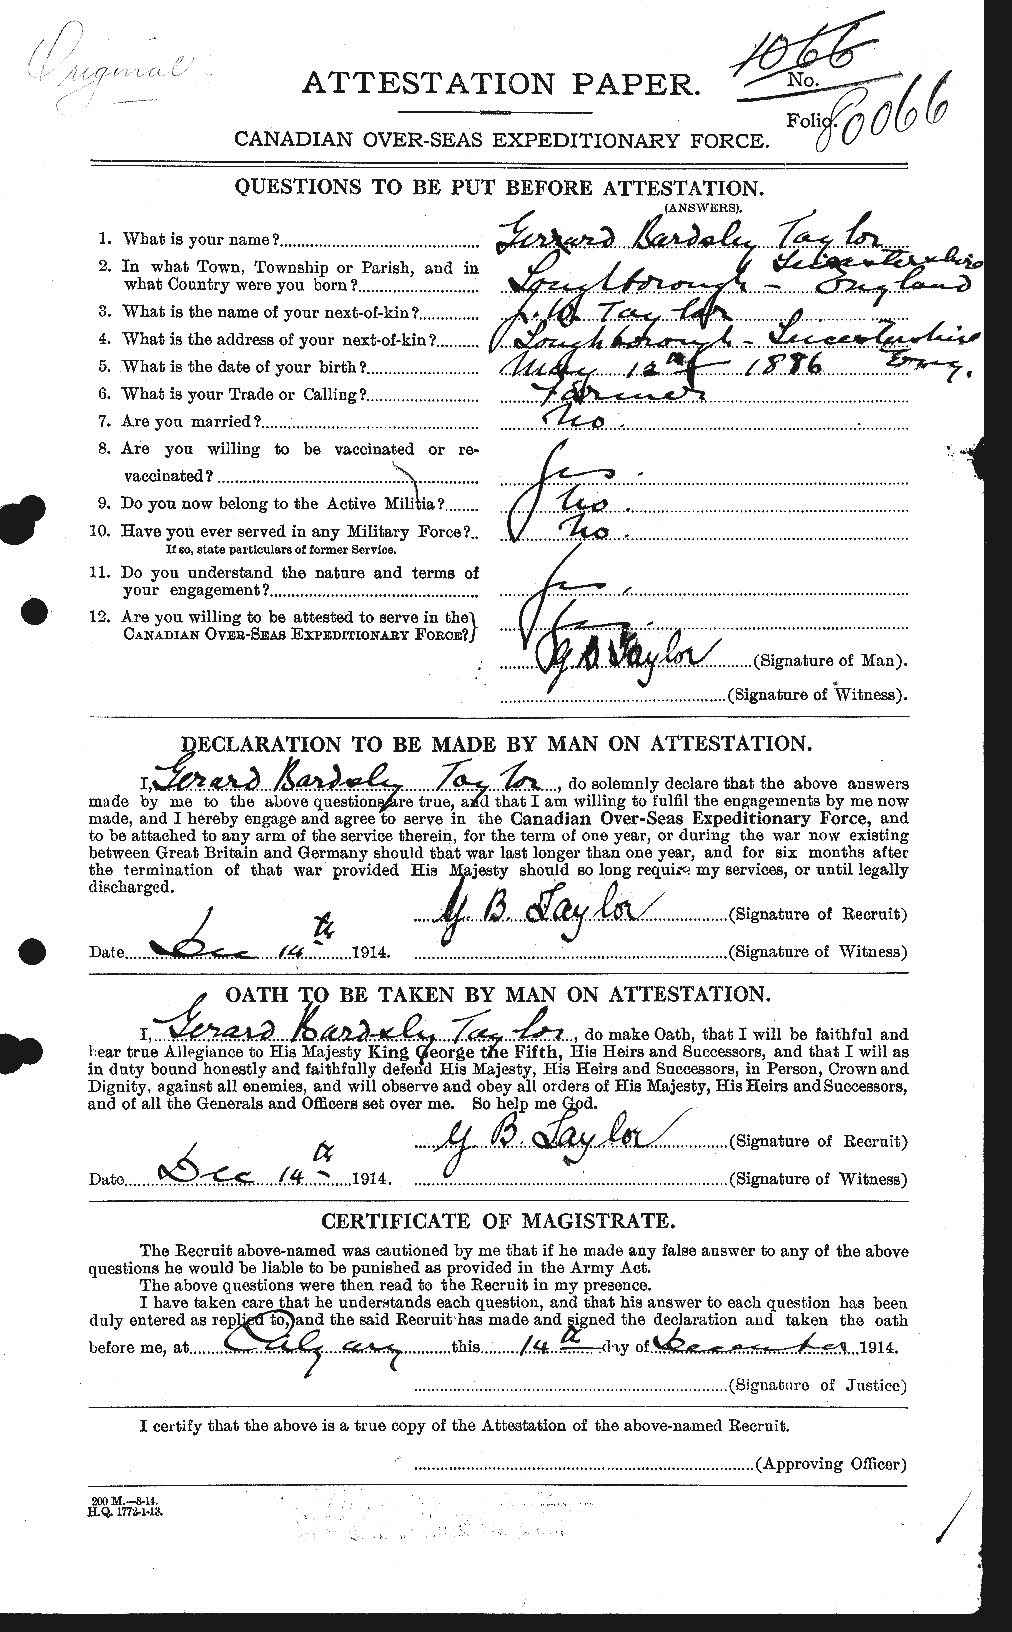 Personnel Records of the First World War - CEF 626377a